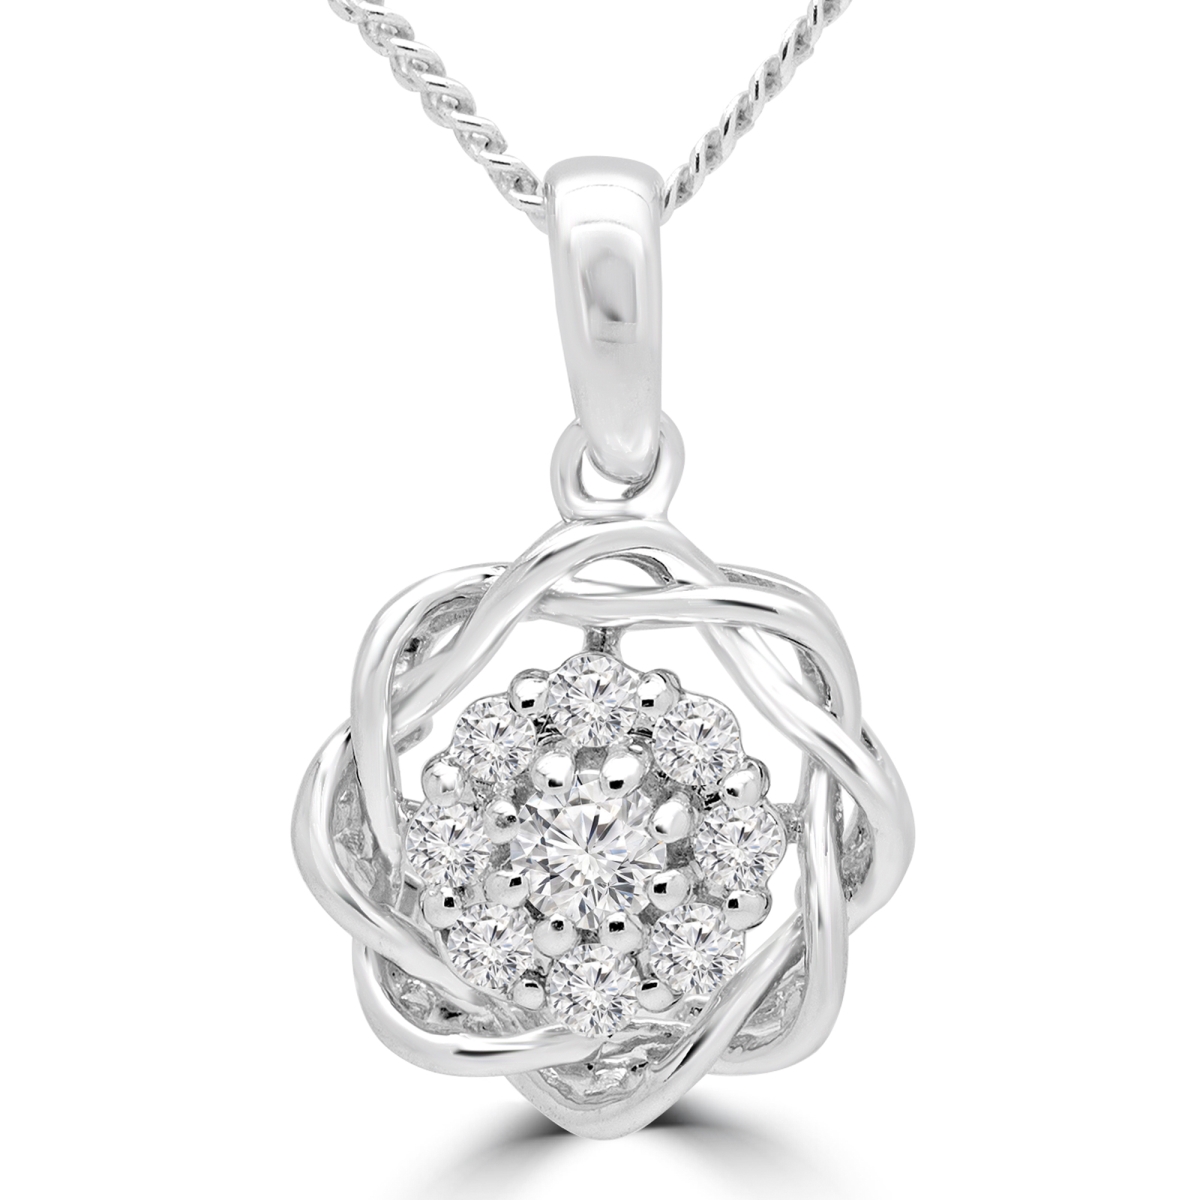 Mdr180022 0.2 Ctw Round Diamond Floral Motif Cluster Pendant Necklace In 14k White Gold With Chain